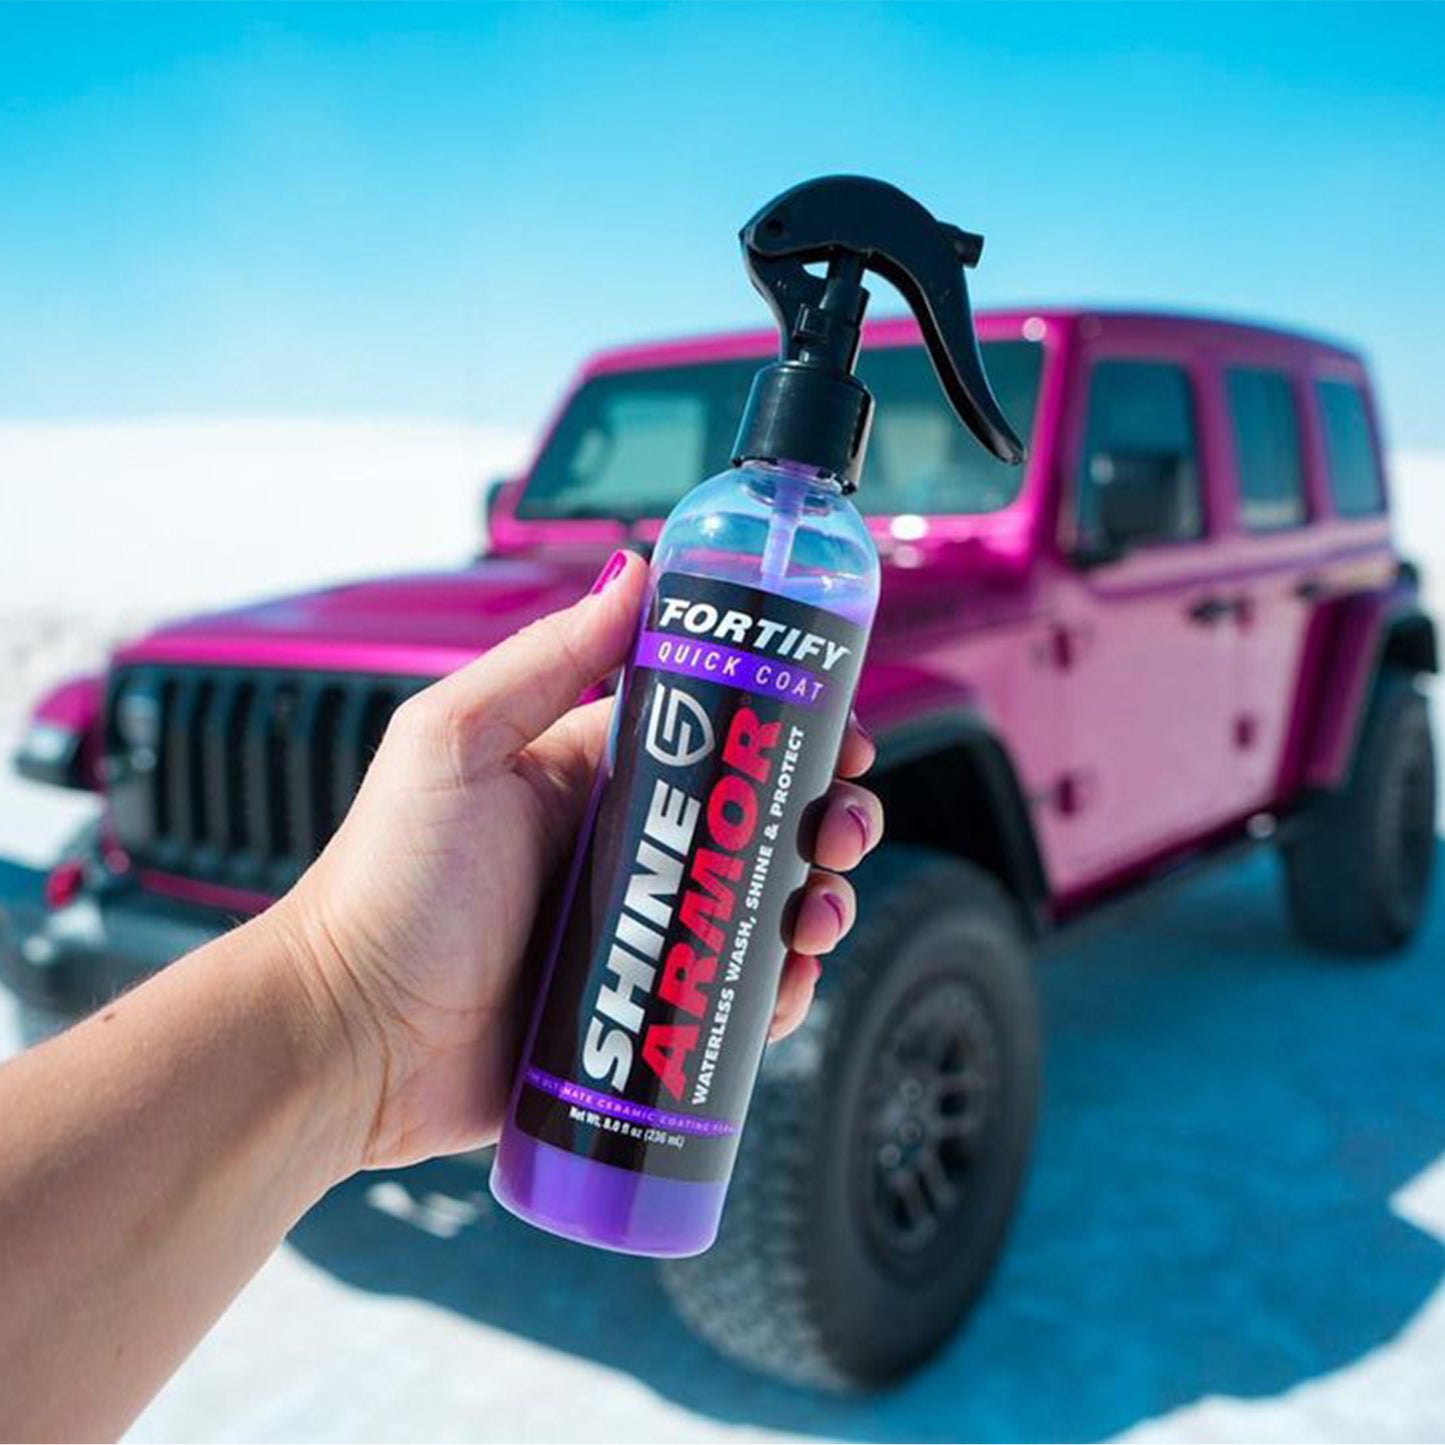 Nasca Shine Armor Fortify Quick For Car Ceramic Coating - Buy Nasca Shine  Armor Fortify Quick For Car Ceramic Coating Product on